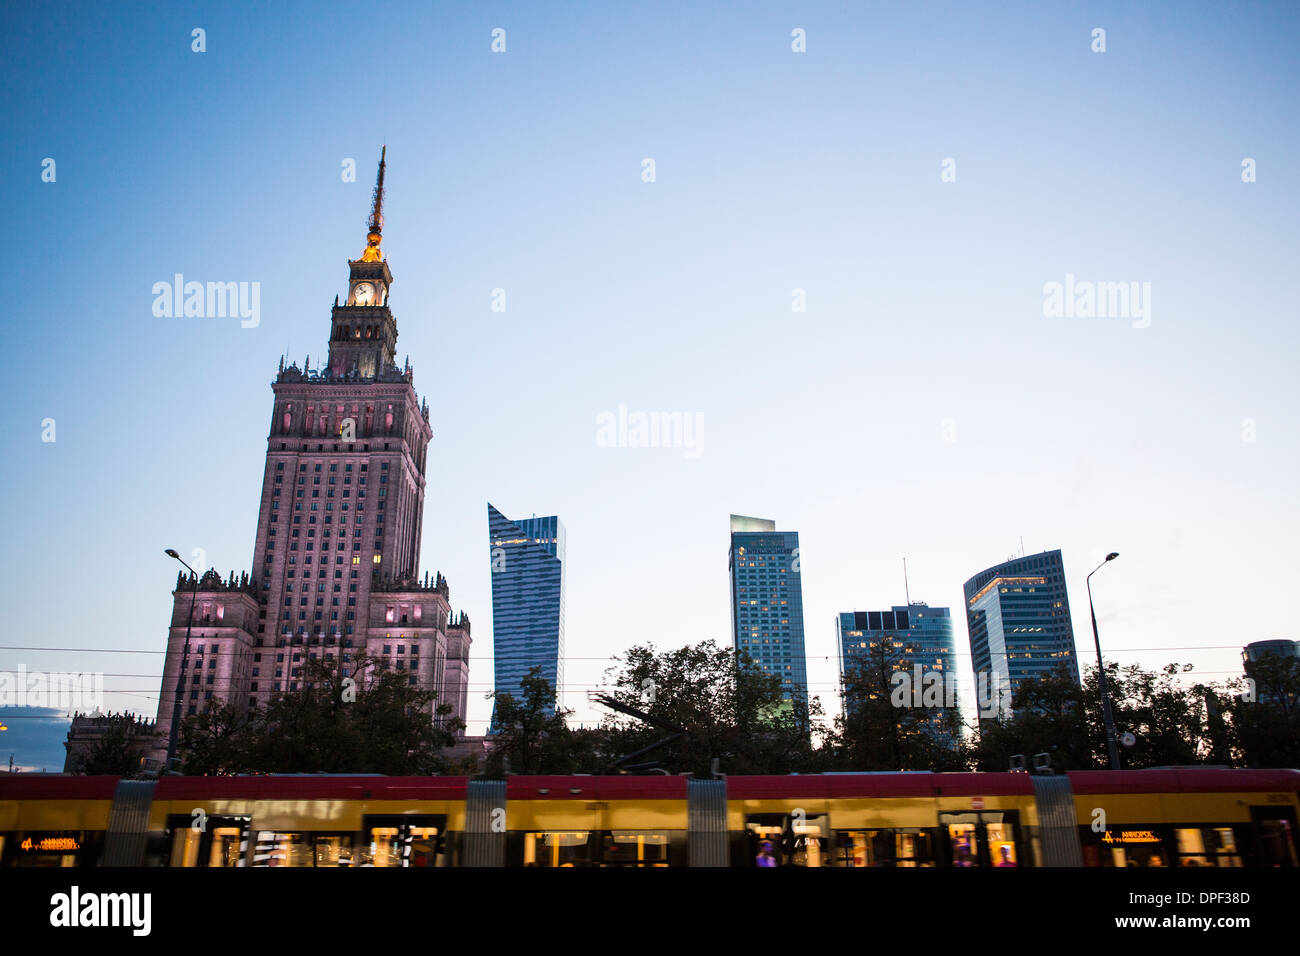 The Palace of Culture and Science and tram, Warsaw, Poland Stock Photo